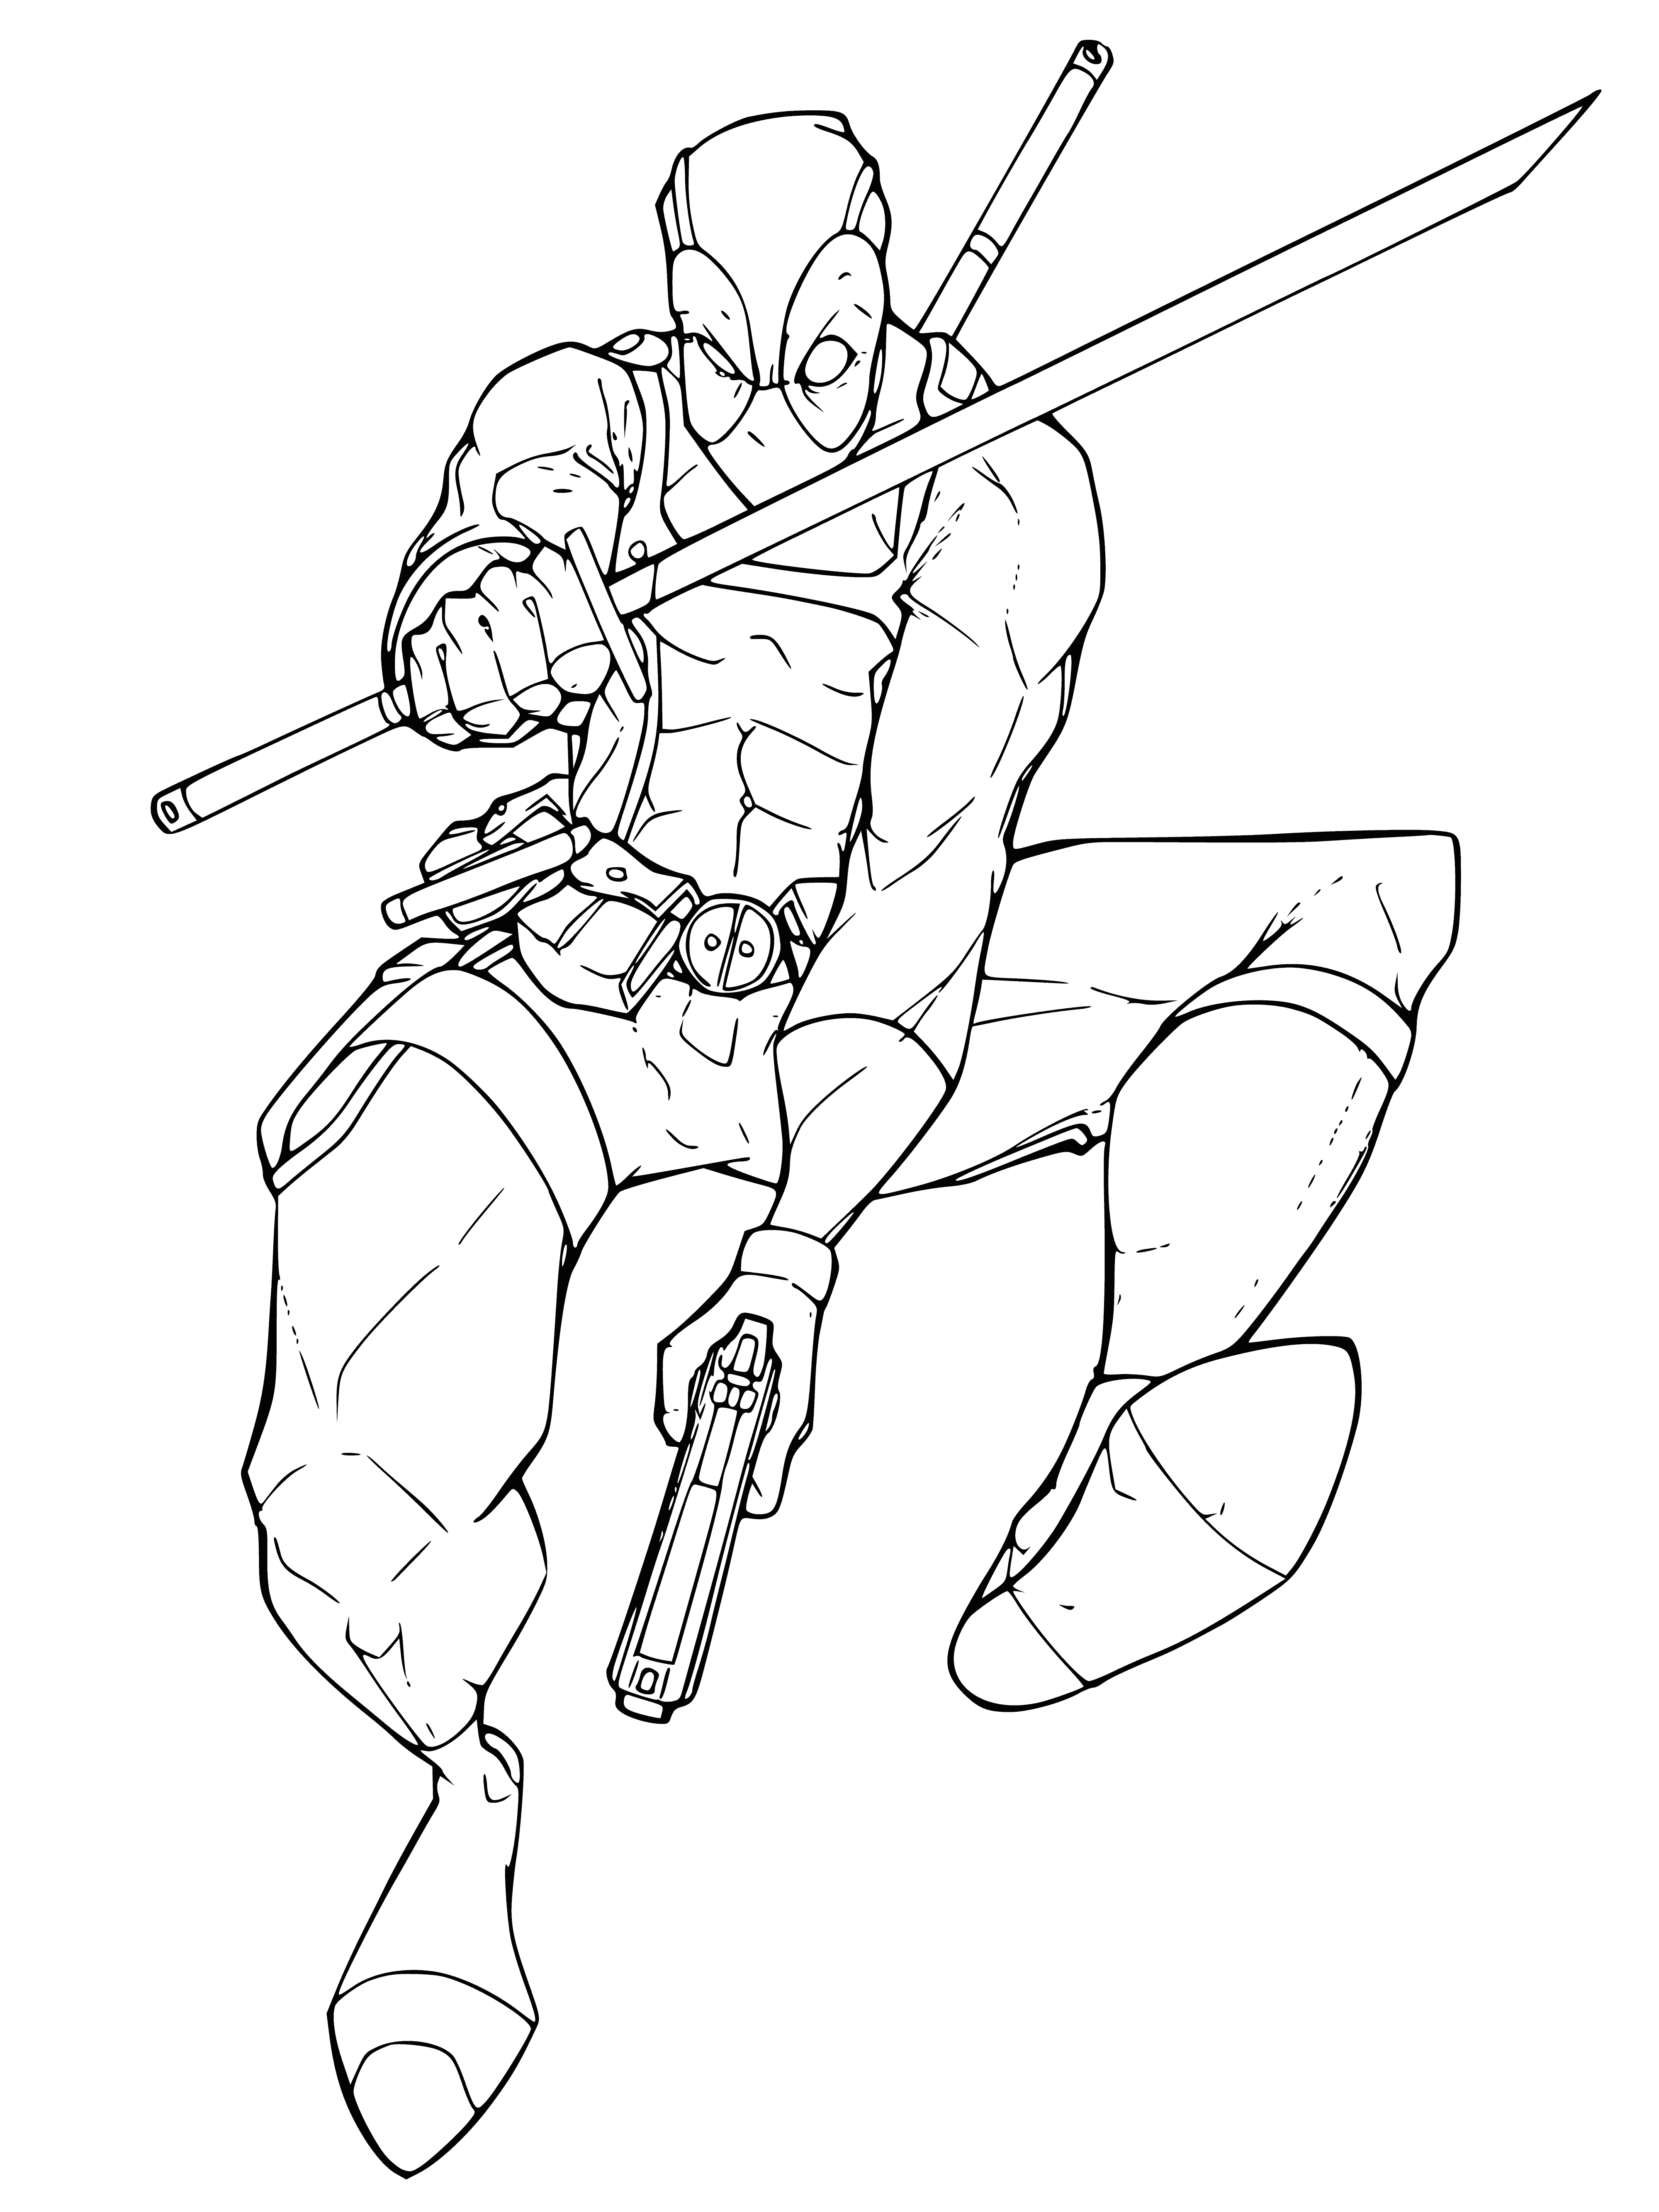 coloring page: => Deadpool is attacking, swords drawn, ready to fight. #Deadpool